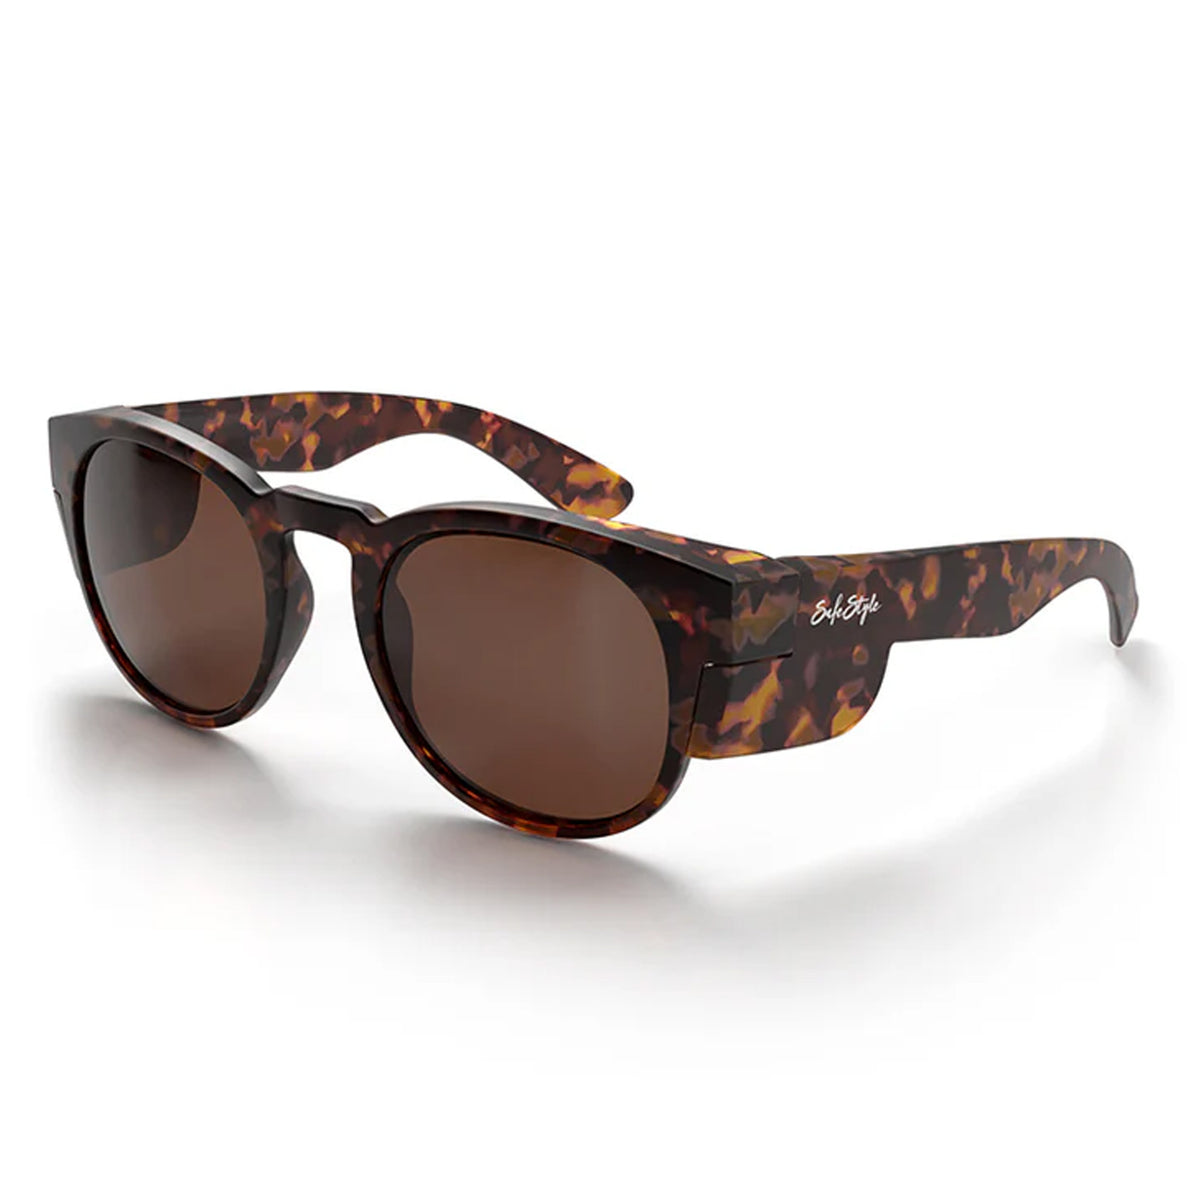 safestyle cruisers matte tort frame with brown polarised lens